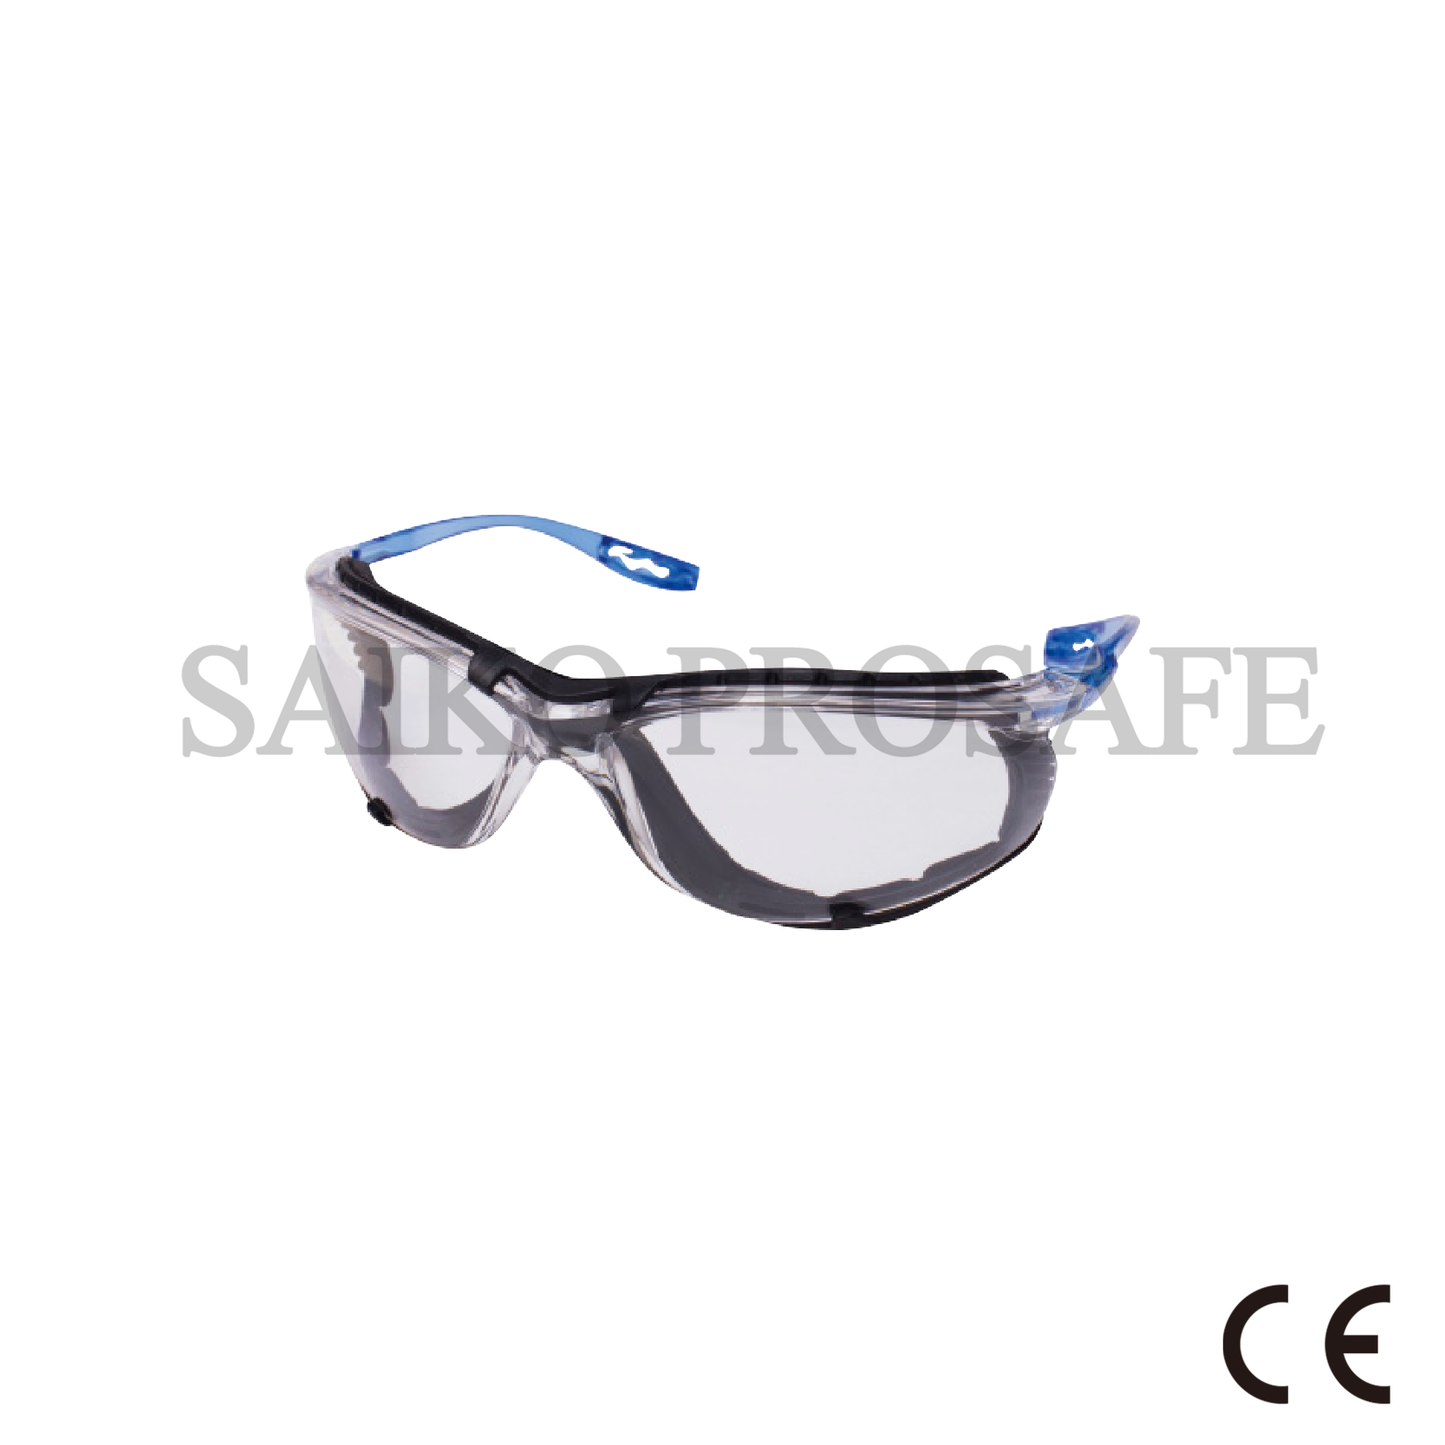 Safety spectacles safety glasses KM1502060